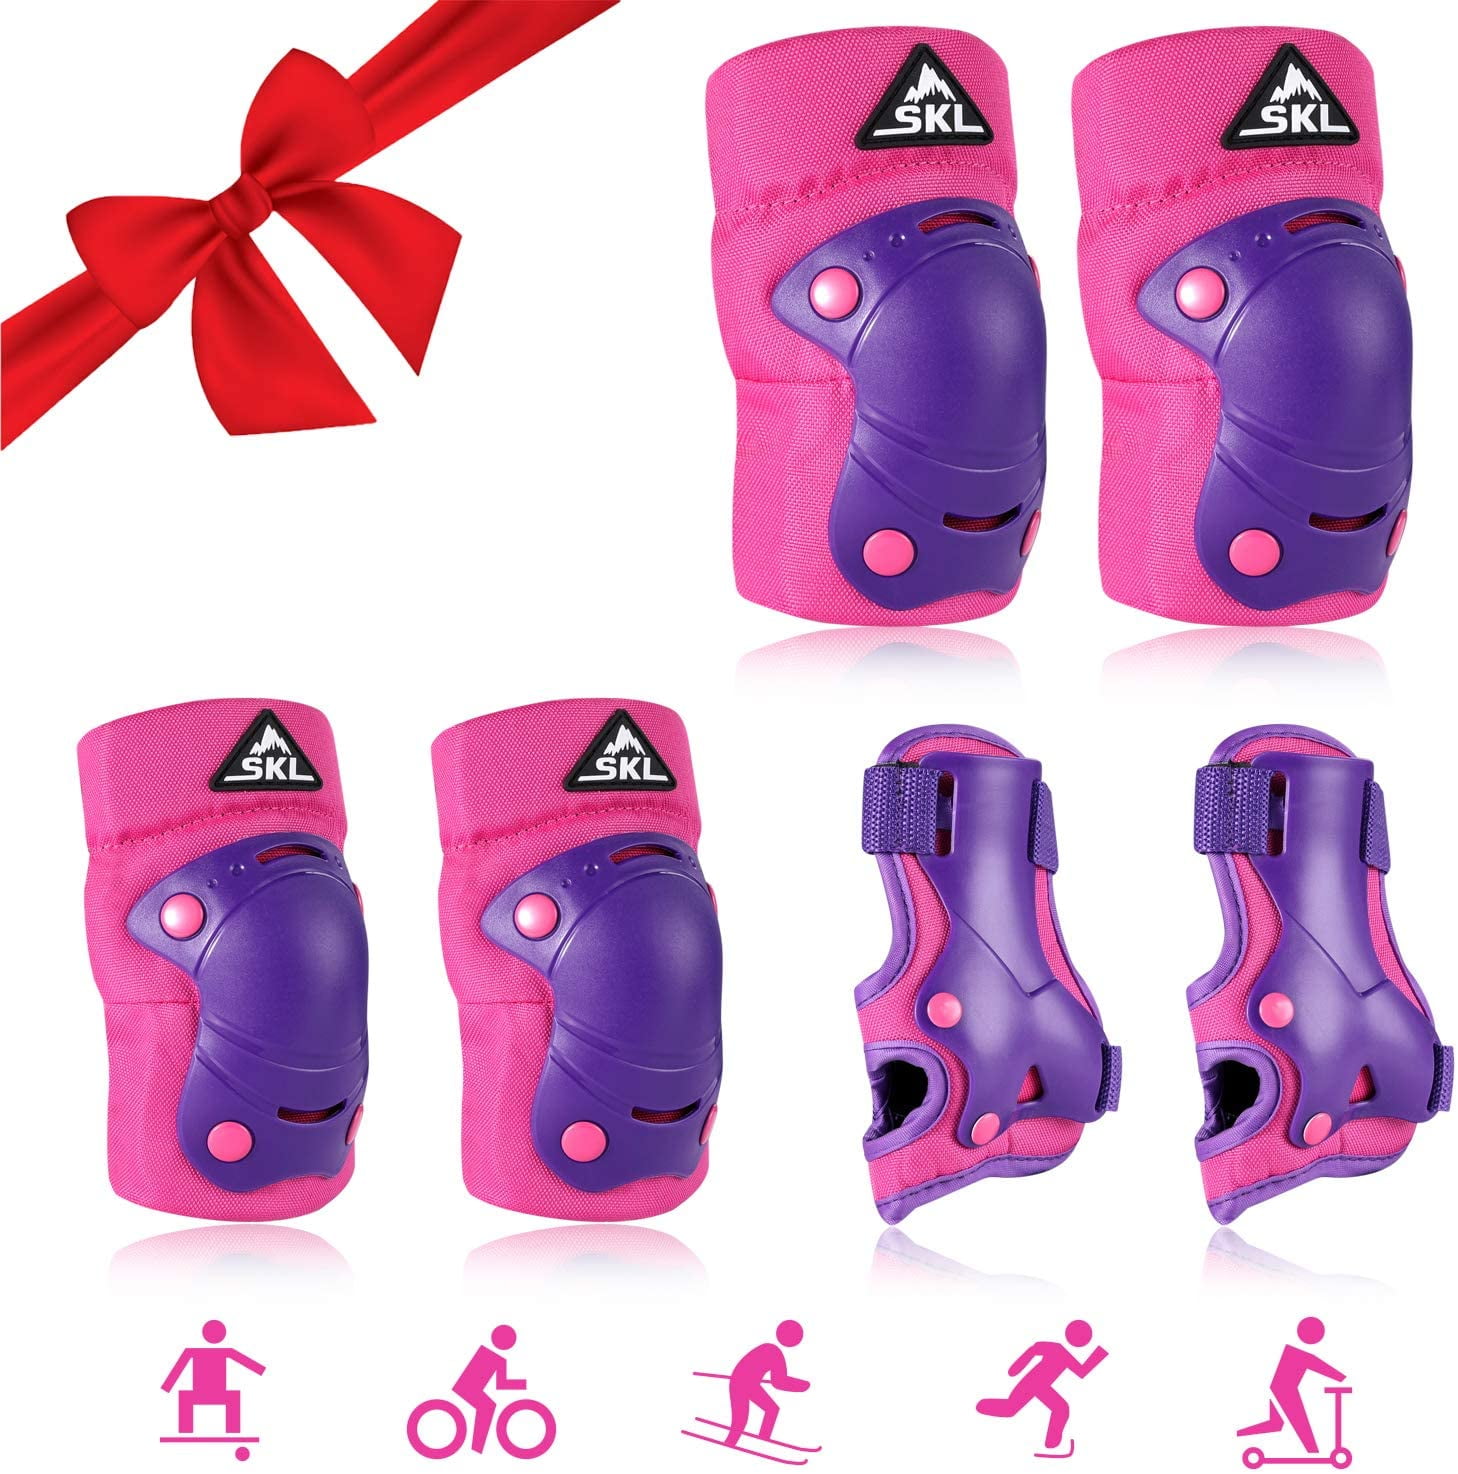 Knee Pads Elbow Pads Ages 3-6 Toddler & 5-8 Kids,6 in 1 Protective Gear Safety Set with Wrist Guard for Cycling Skateboard Roller Skating Scooter Bike Ski Sports Boys Girls 